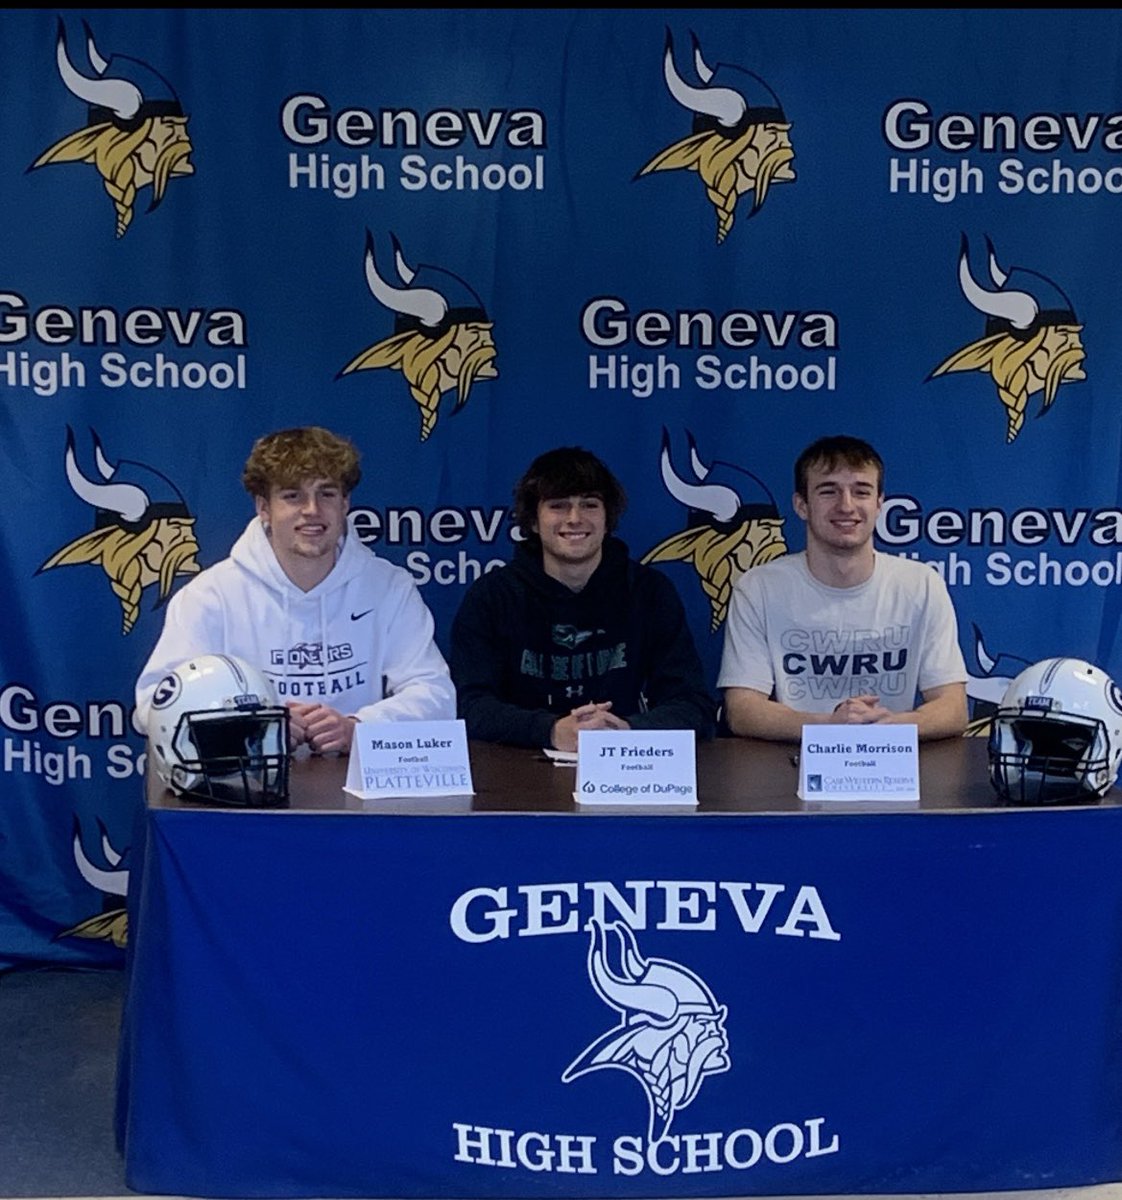 Congrats to these three seniors on signing today to play college football. Couldn’t be happier and prouder of them for all their hard work as a Viking! Can’t wait to see what they do at the next level! #VikingPride